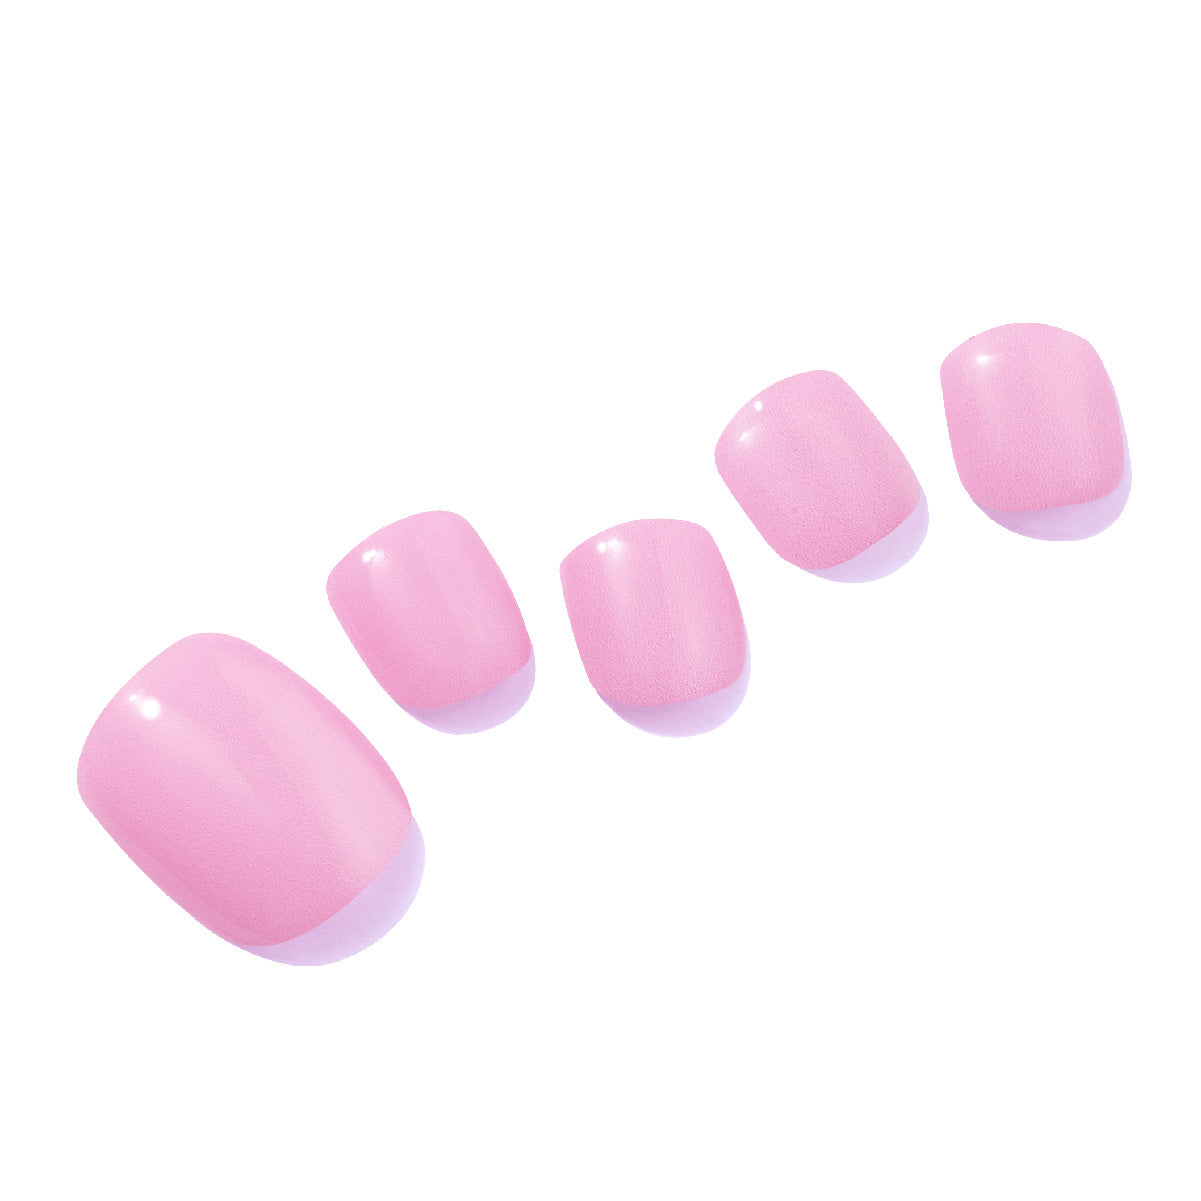 The Pink Pedicure